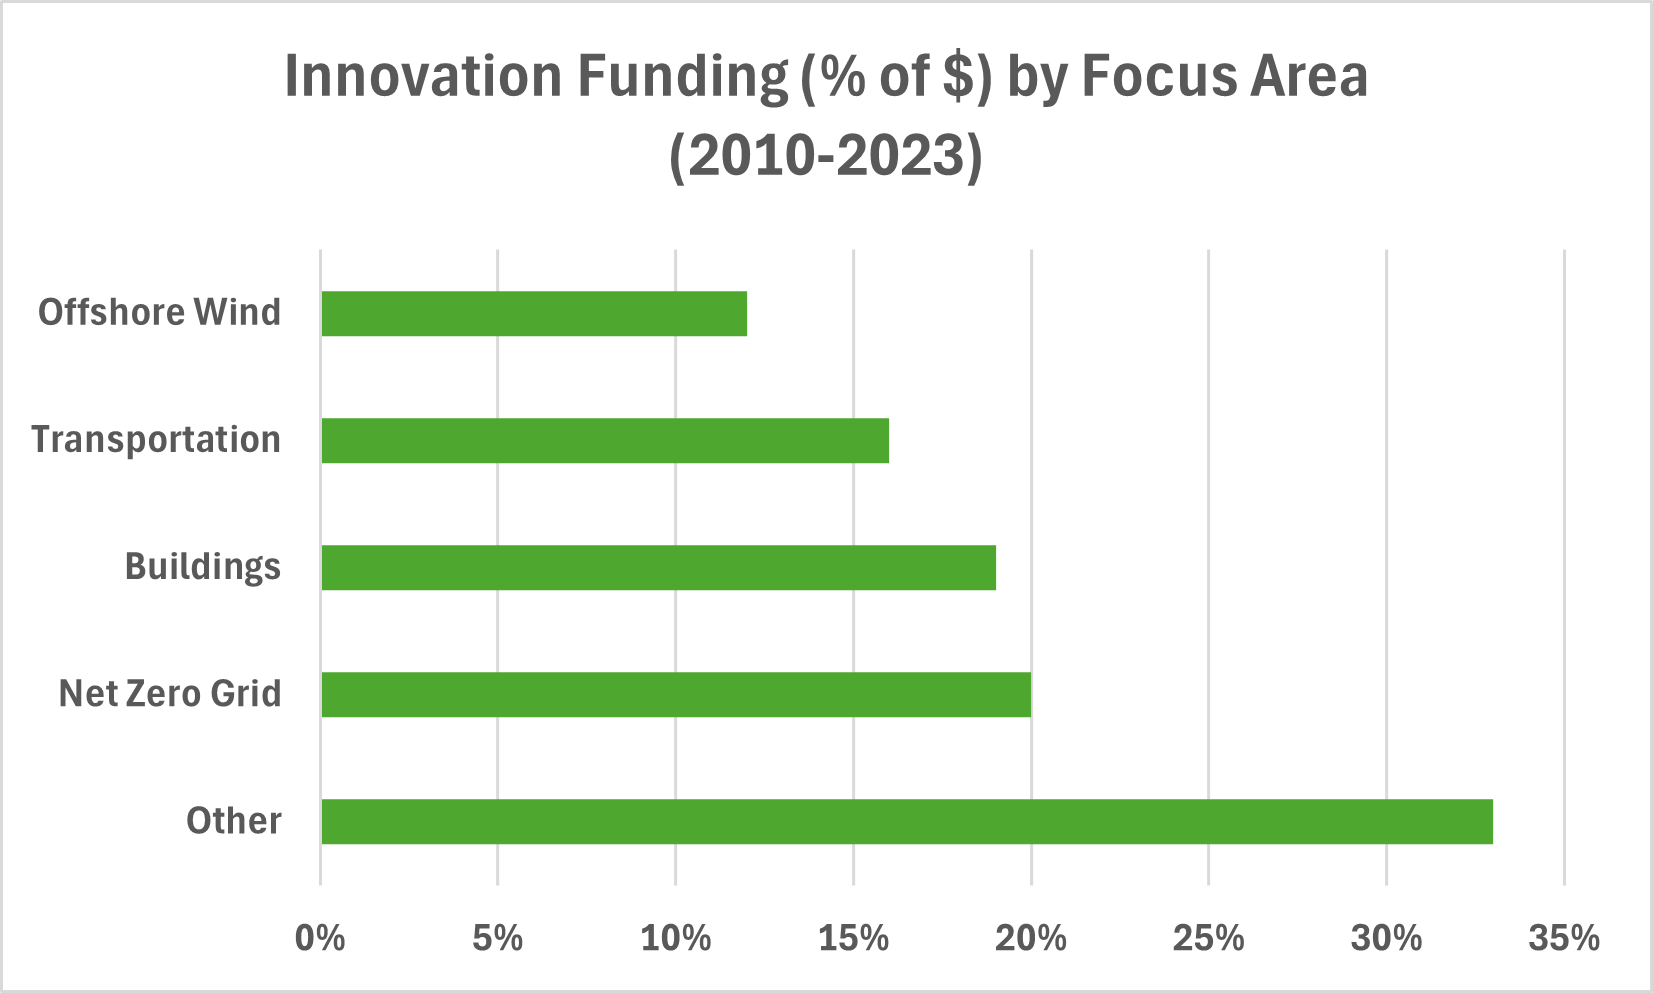 Bar chart of funding by focus area